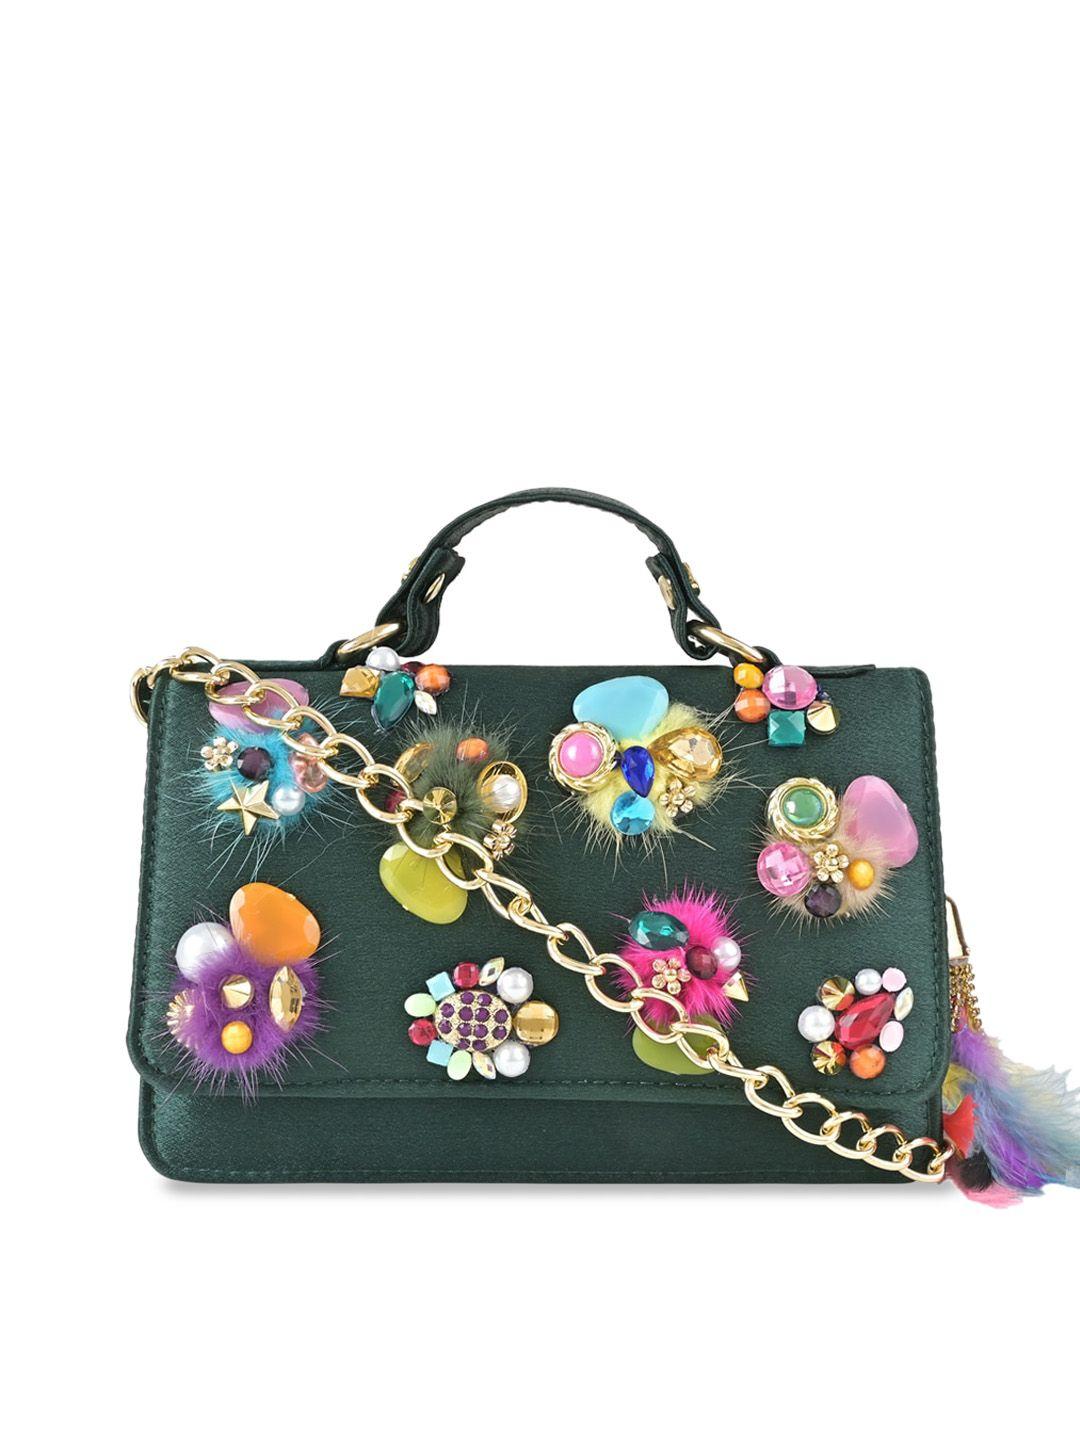 vdesi green floral printed structured handheld bag with applique